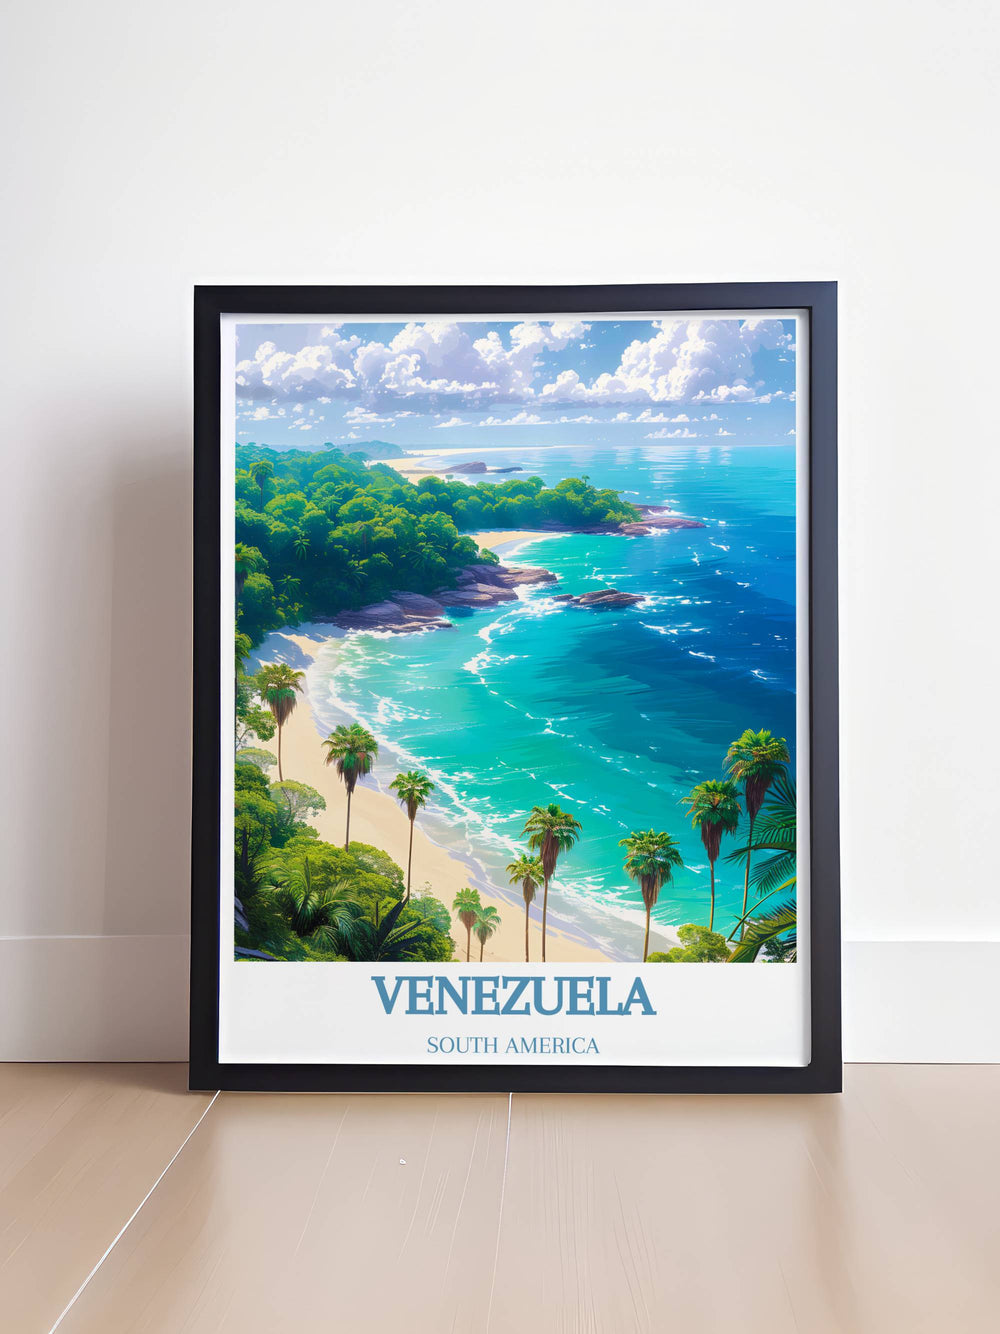 Detailed print of Angel Falls, showcasing the worlds tallest uninterrupted waterfall with water cascading down the Auyán Tepuí mountain in Venezuela.